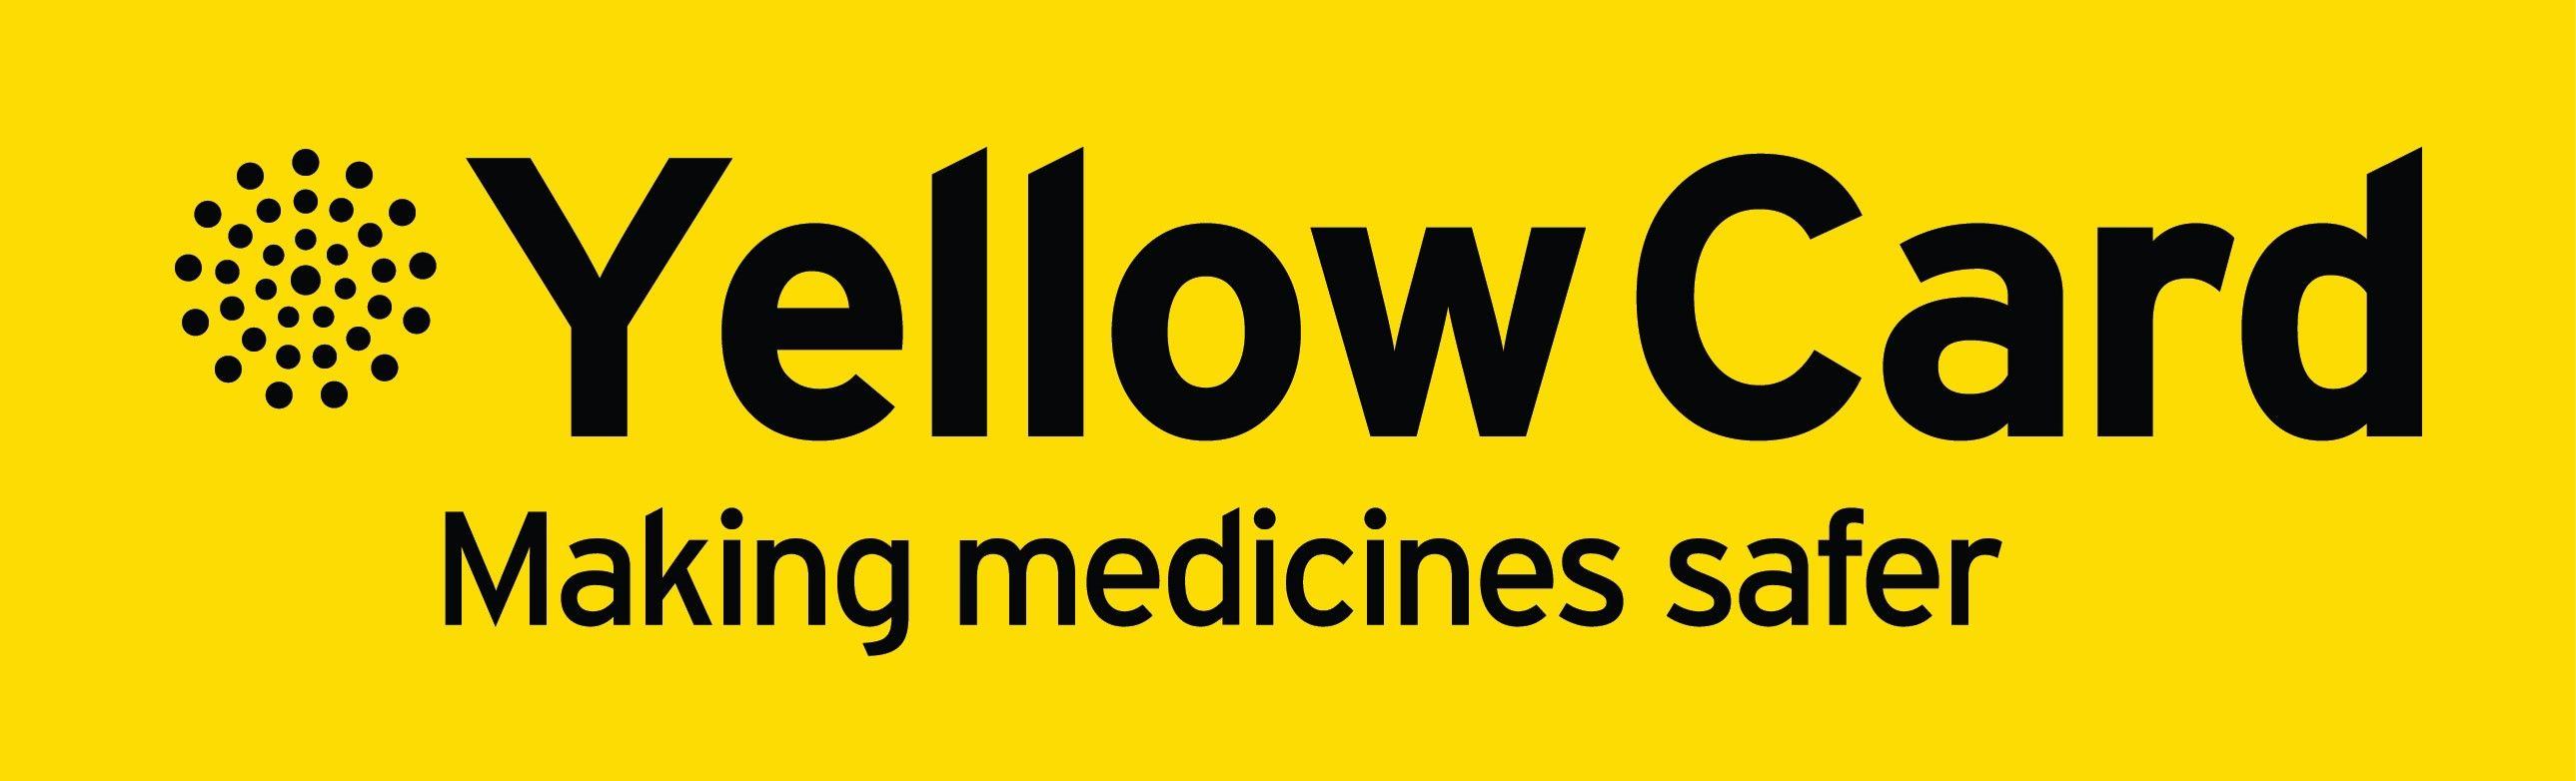 Yellowcard Logo - Suspect a side effect from a medicine? Information Forum